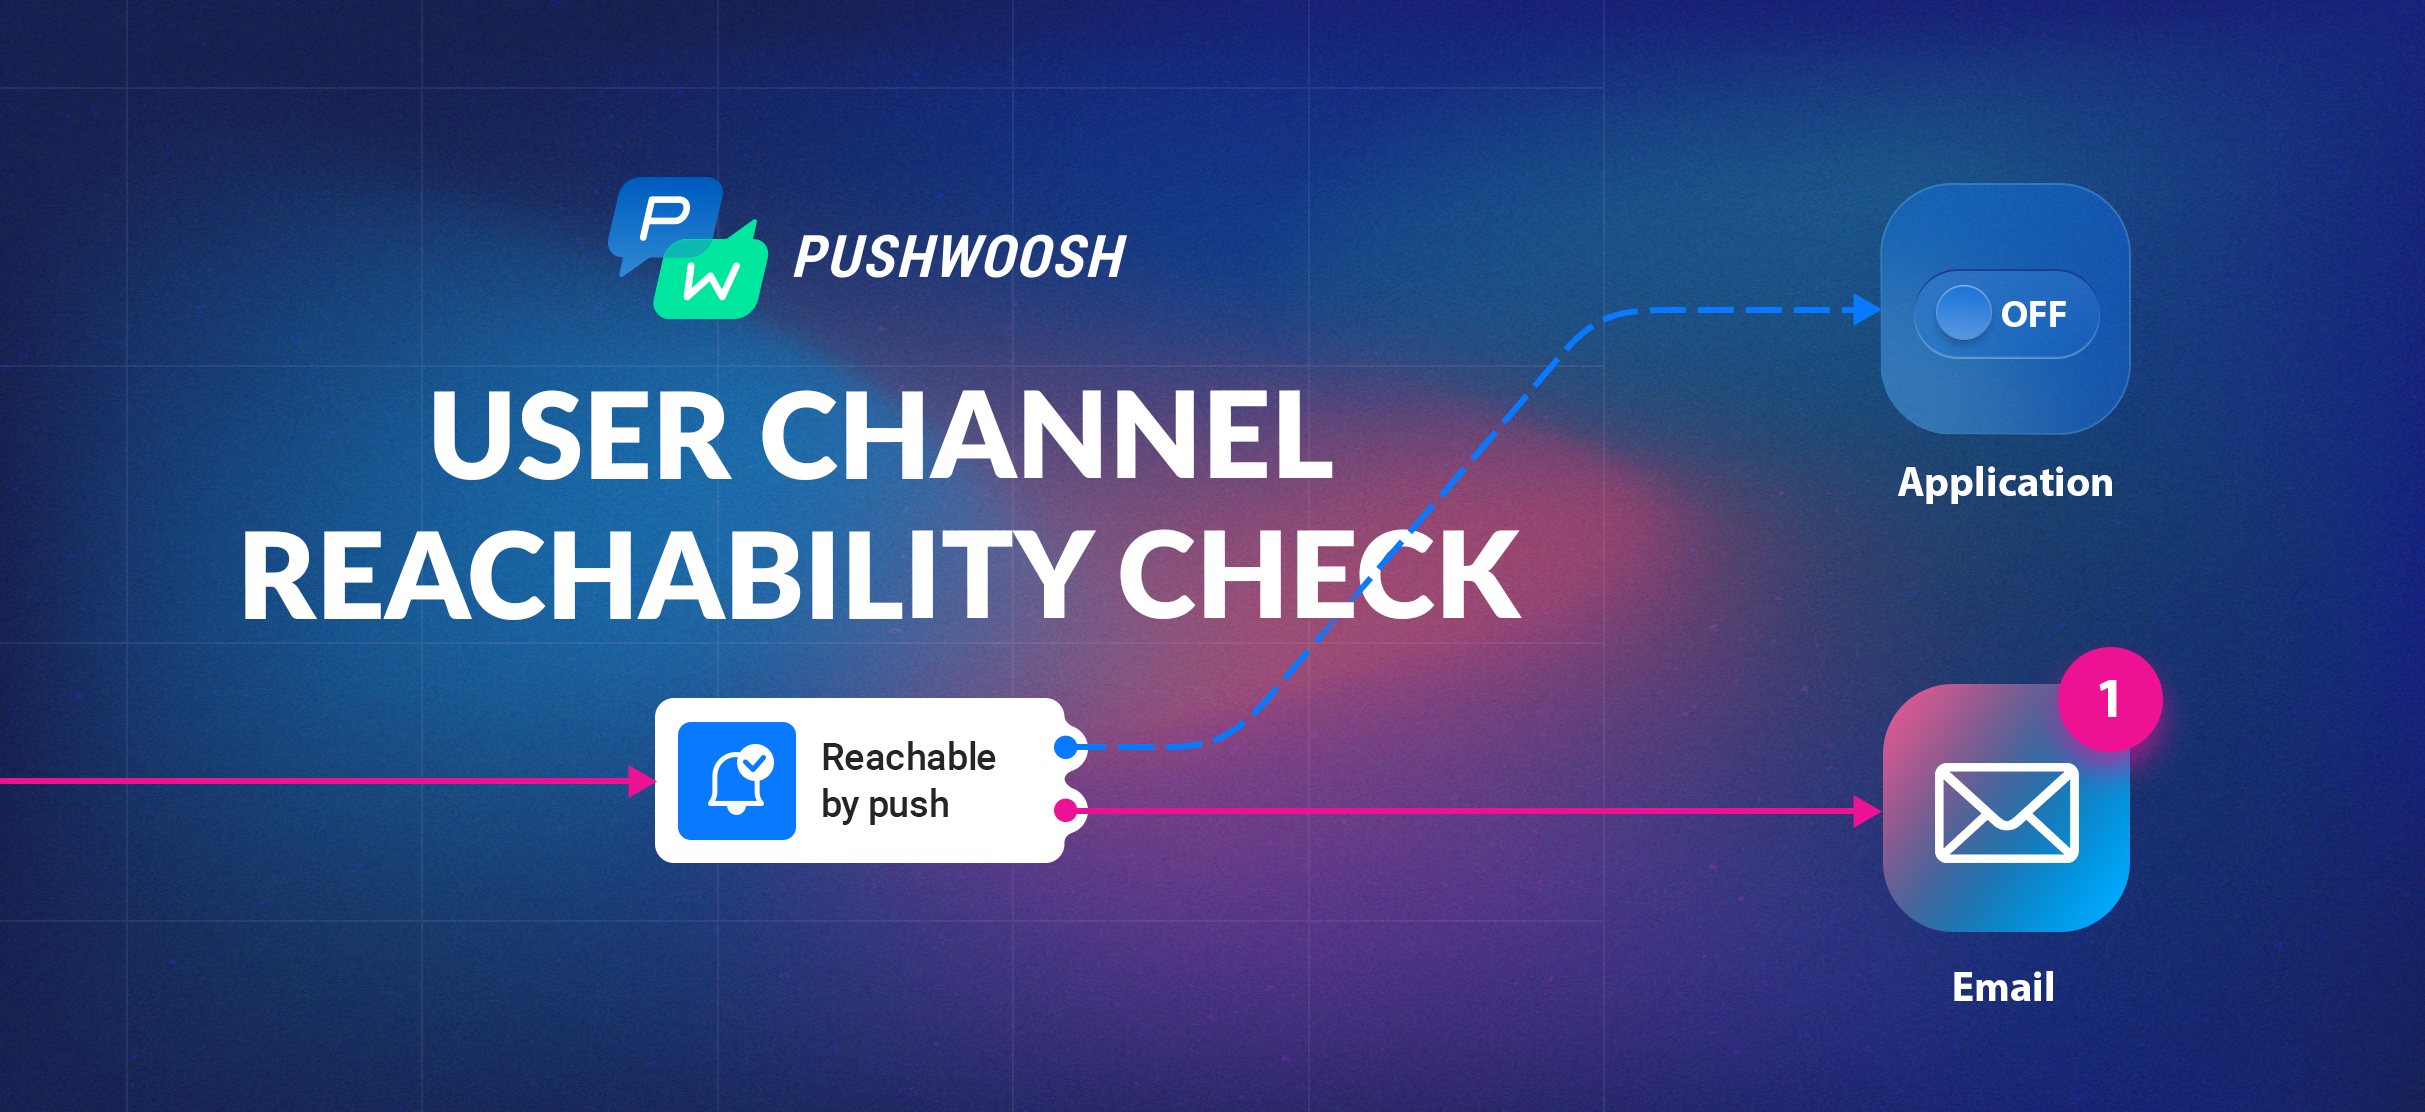 Check Reachability with Pushwoosh and Keep Every Single Customer Engaged